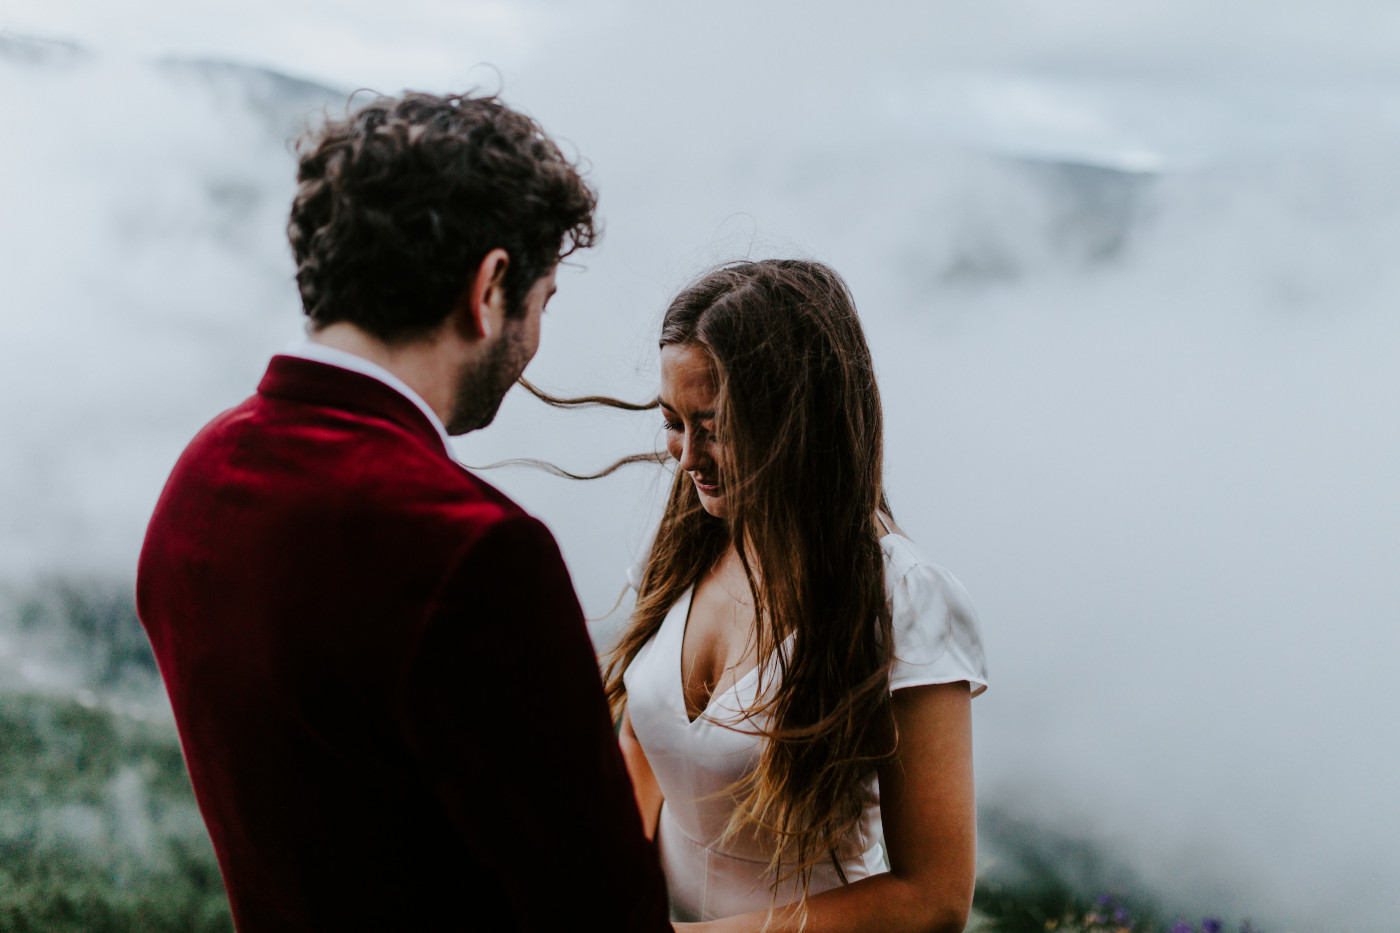 Murray and Katelyn recite their vows. Elopement wedding photography at Mount Hood by Sienna Plus Josh.